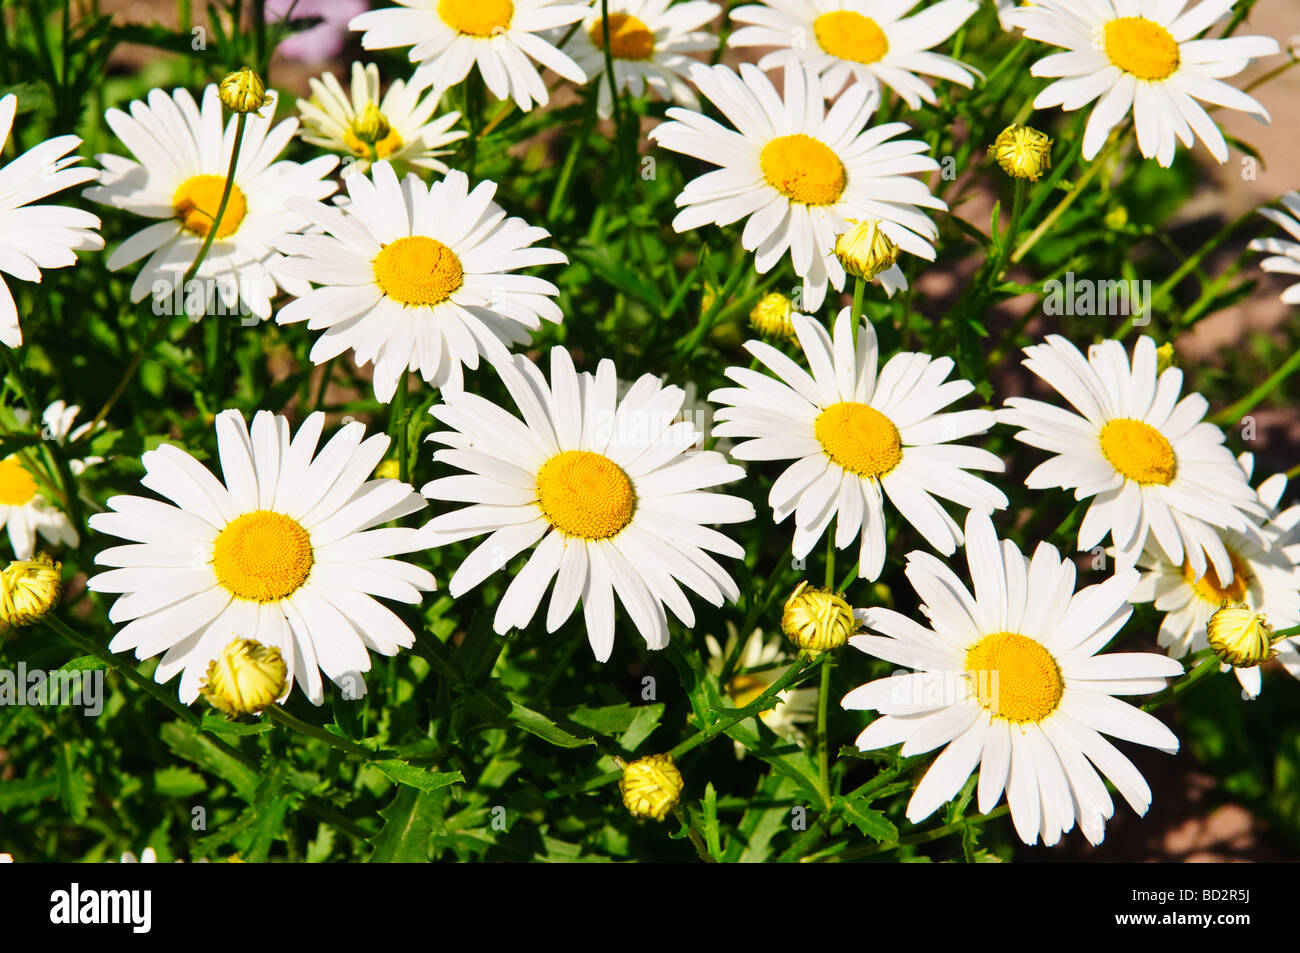 Many daisies on natural background Stock Photo